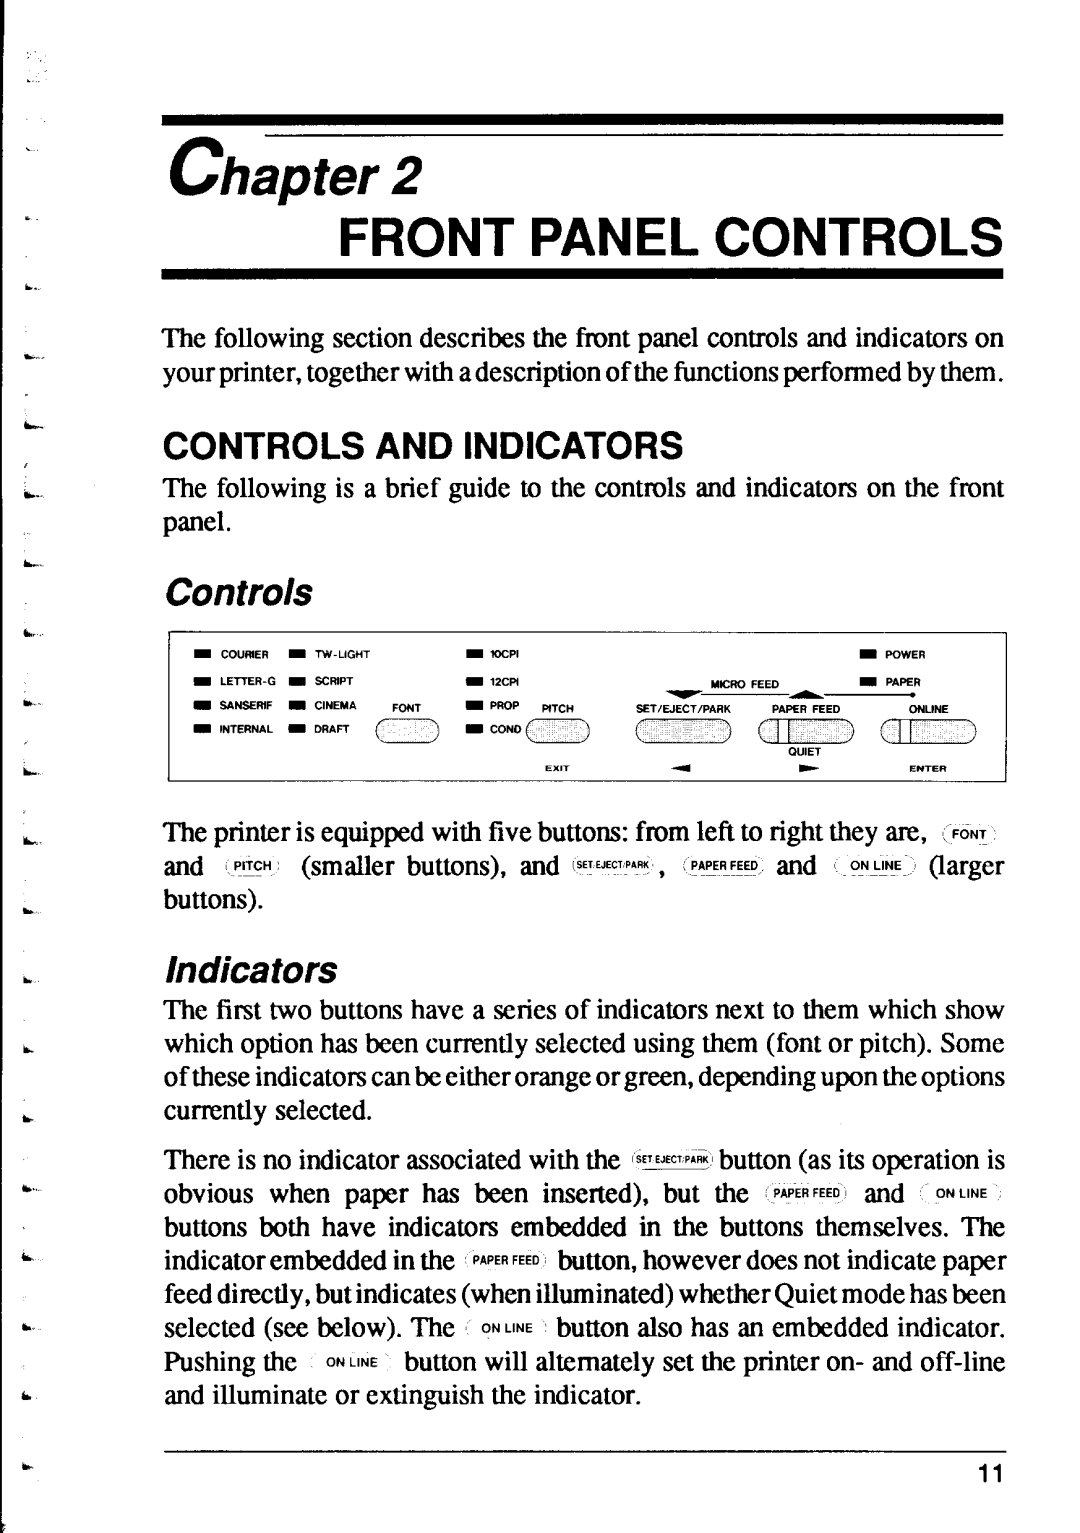 Star Micronics XR-1000, XR-1500 user manual Chapter, Front Panel Controls, Controls And Indicators 